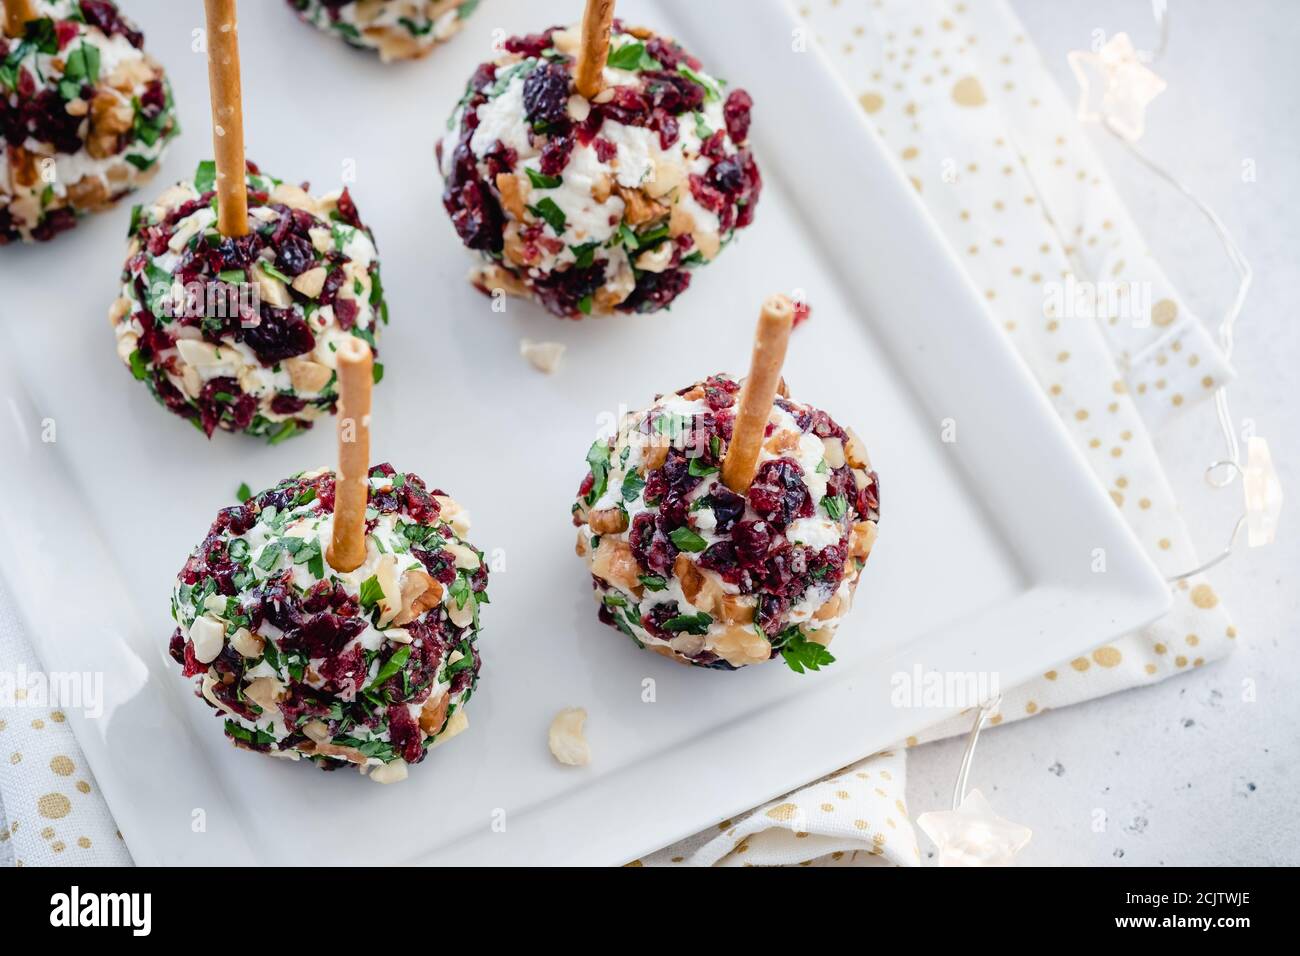 Christmas cheese ball appetizers with cranberries Stock Photo